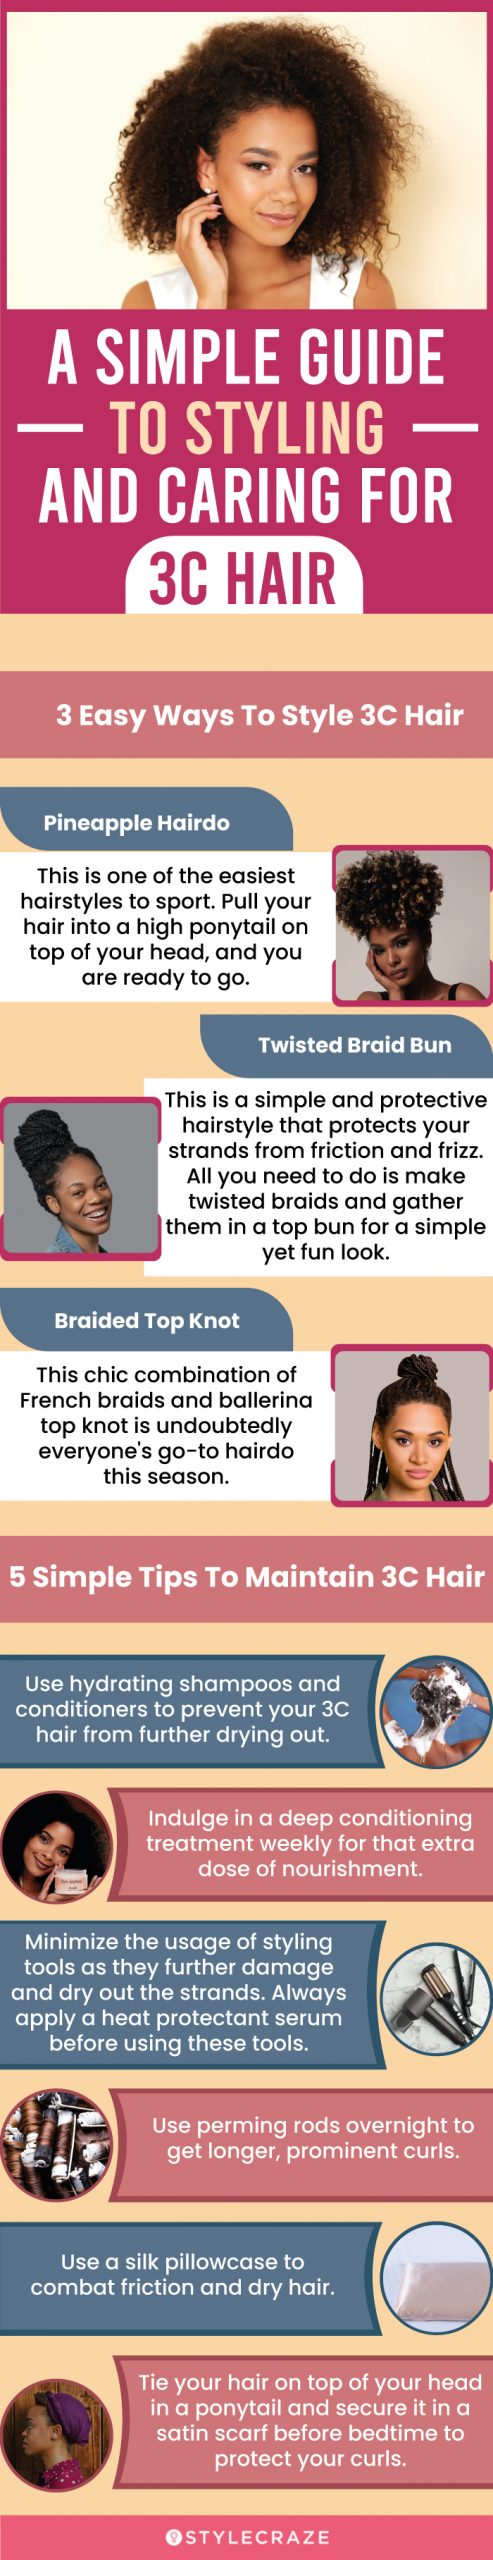 a simple guide to styling and caring for 3c hair (infographic)